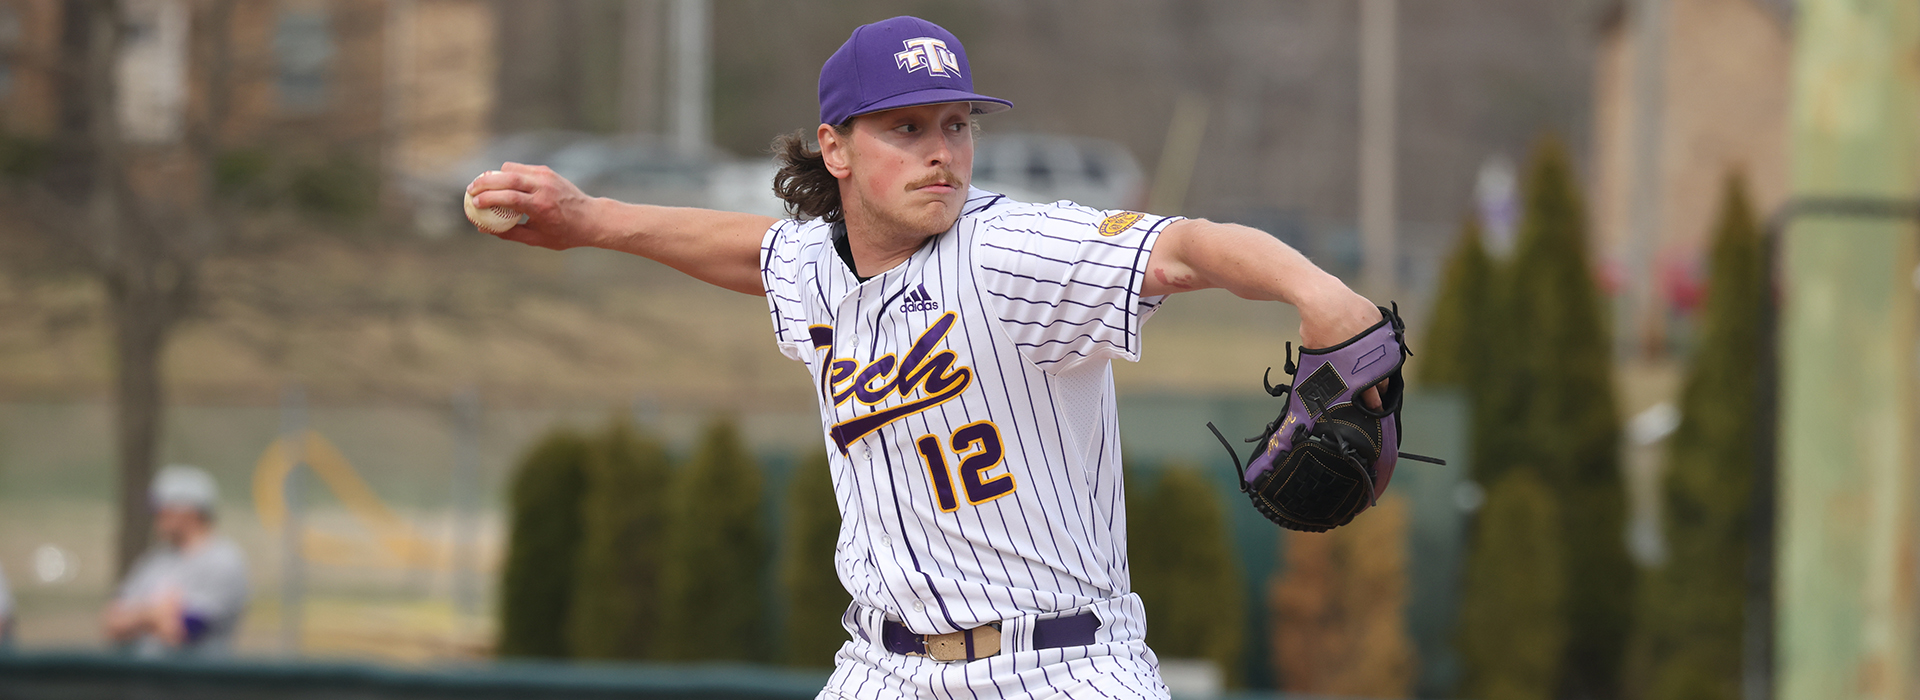 Golden Eagles host Bradley in final non-conference weekend series